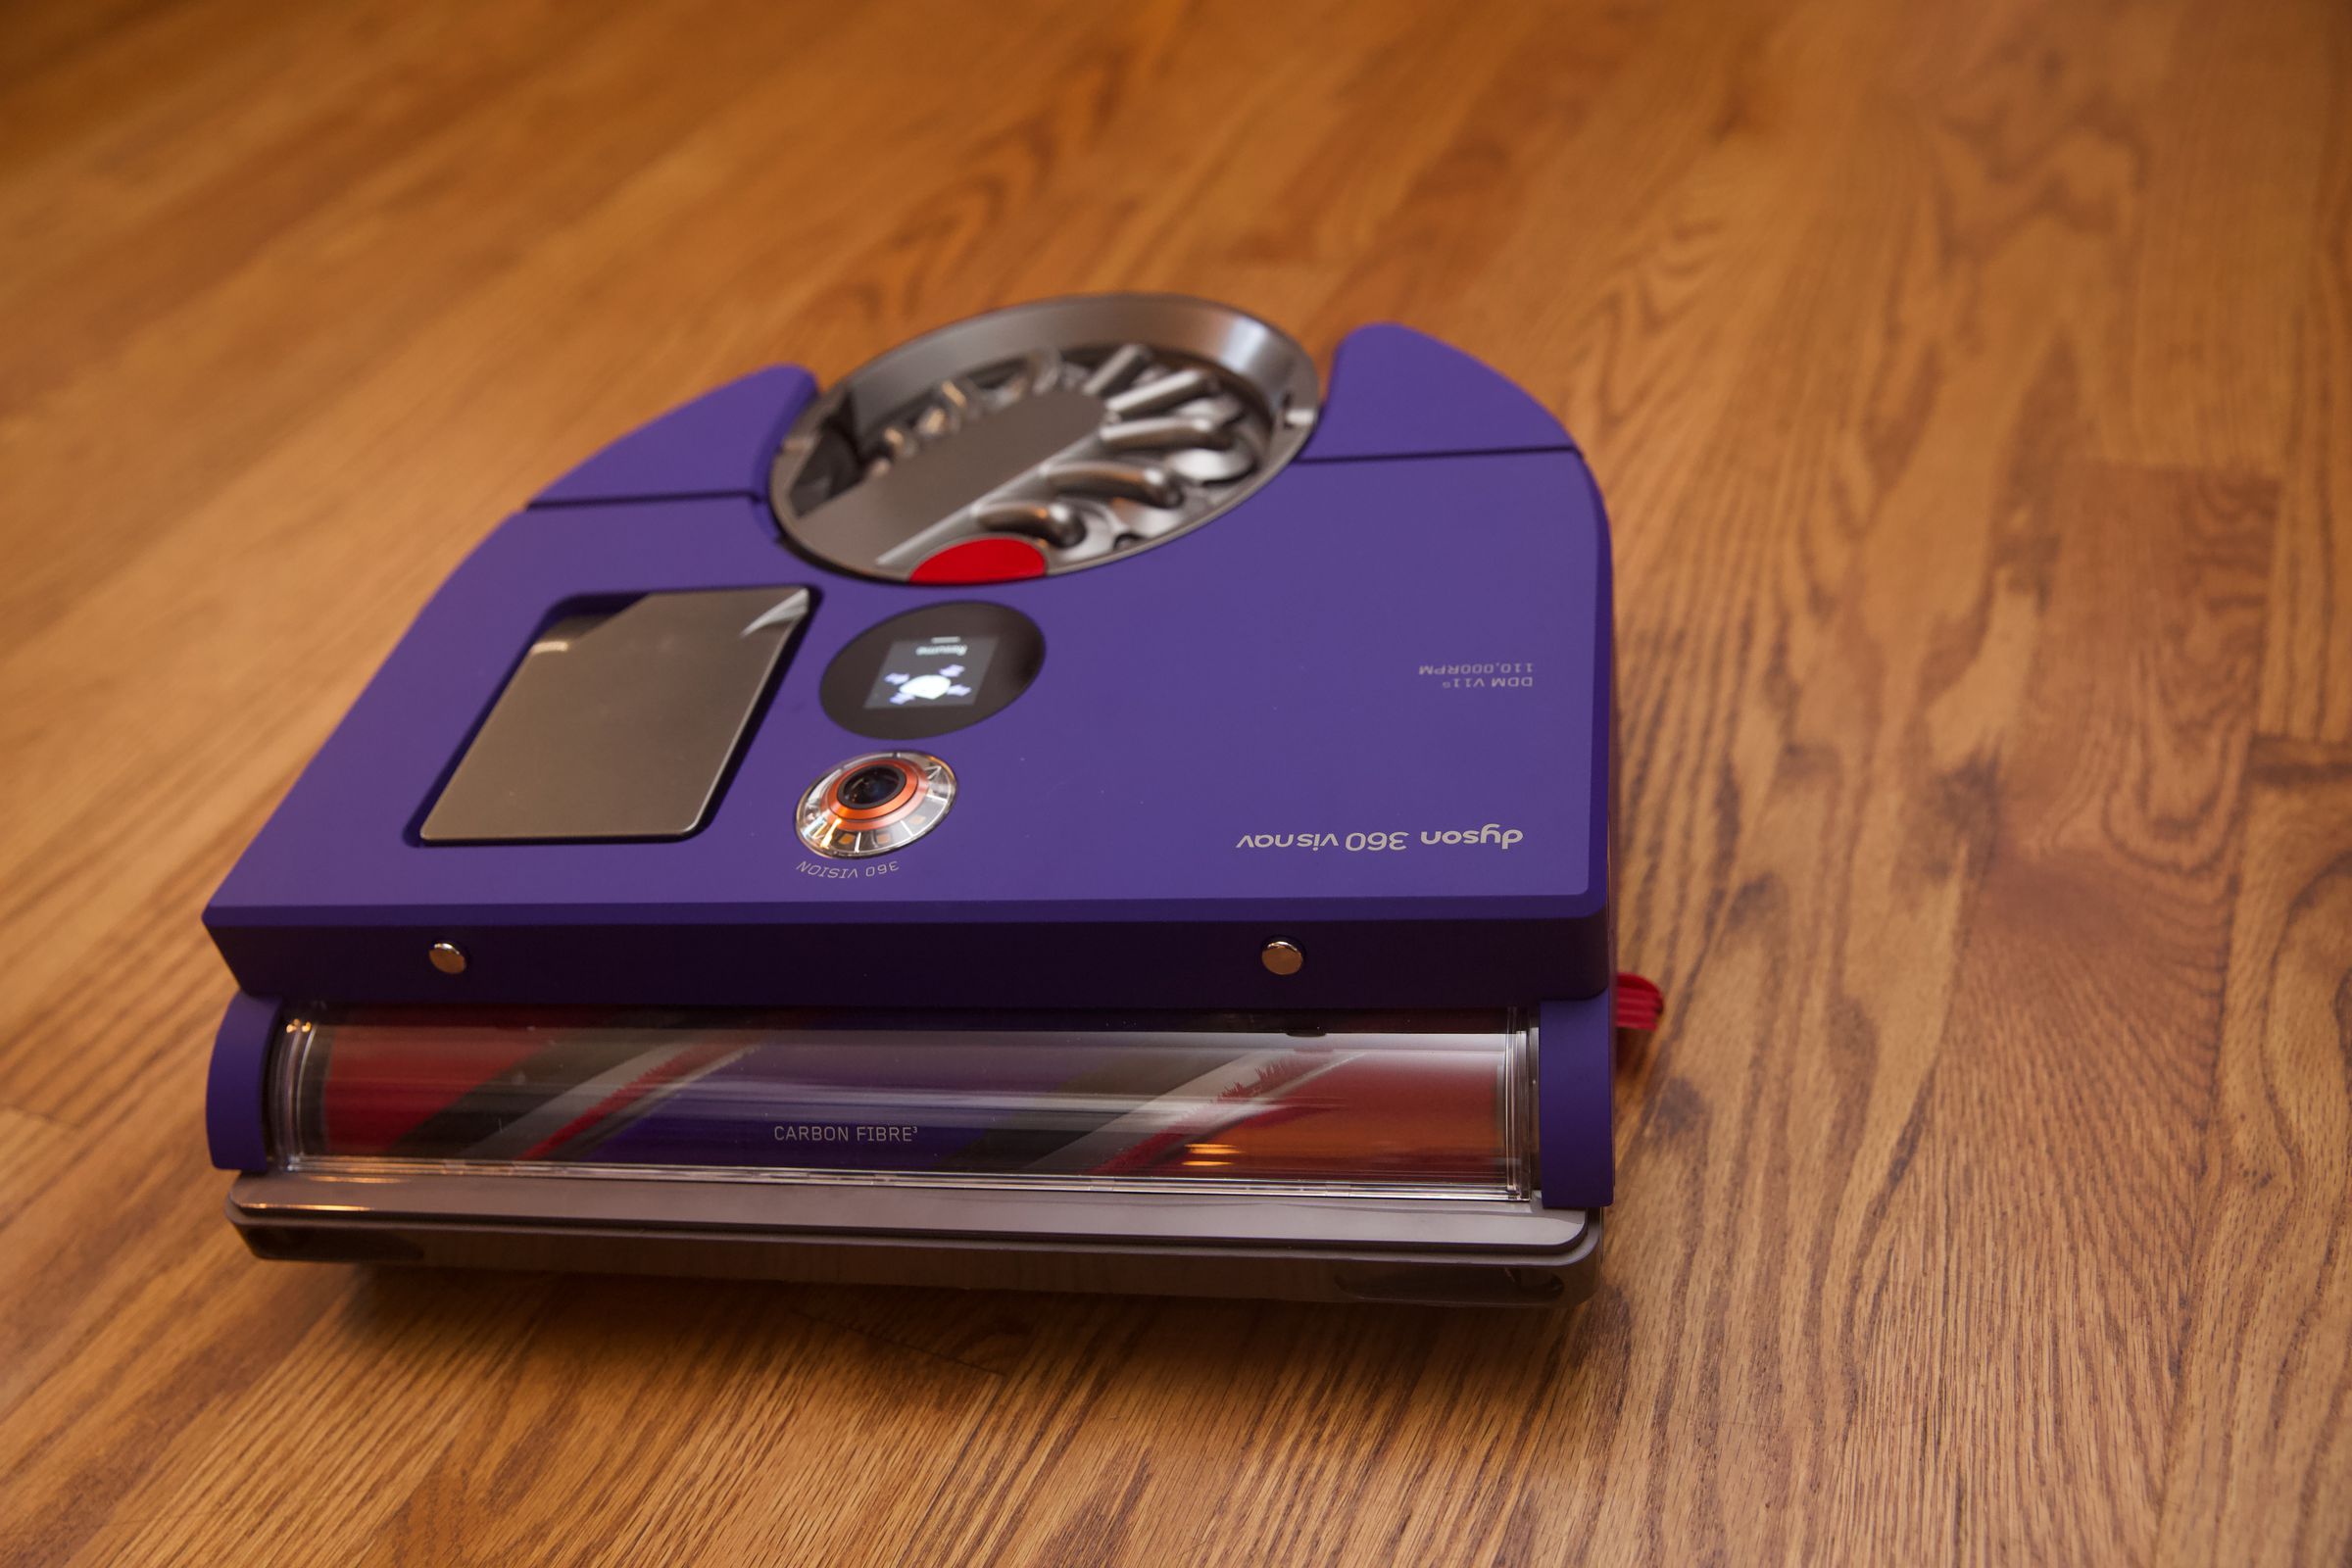 Dyson’s newest robo vac claims to have double the suction power of any other robot vacuum.